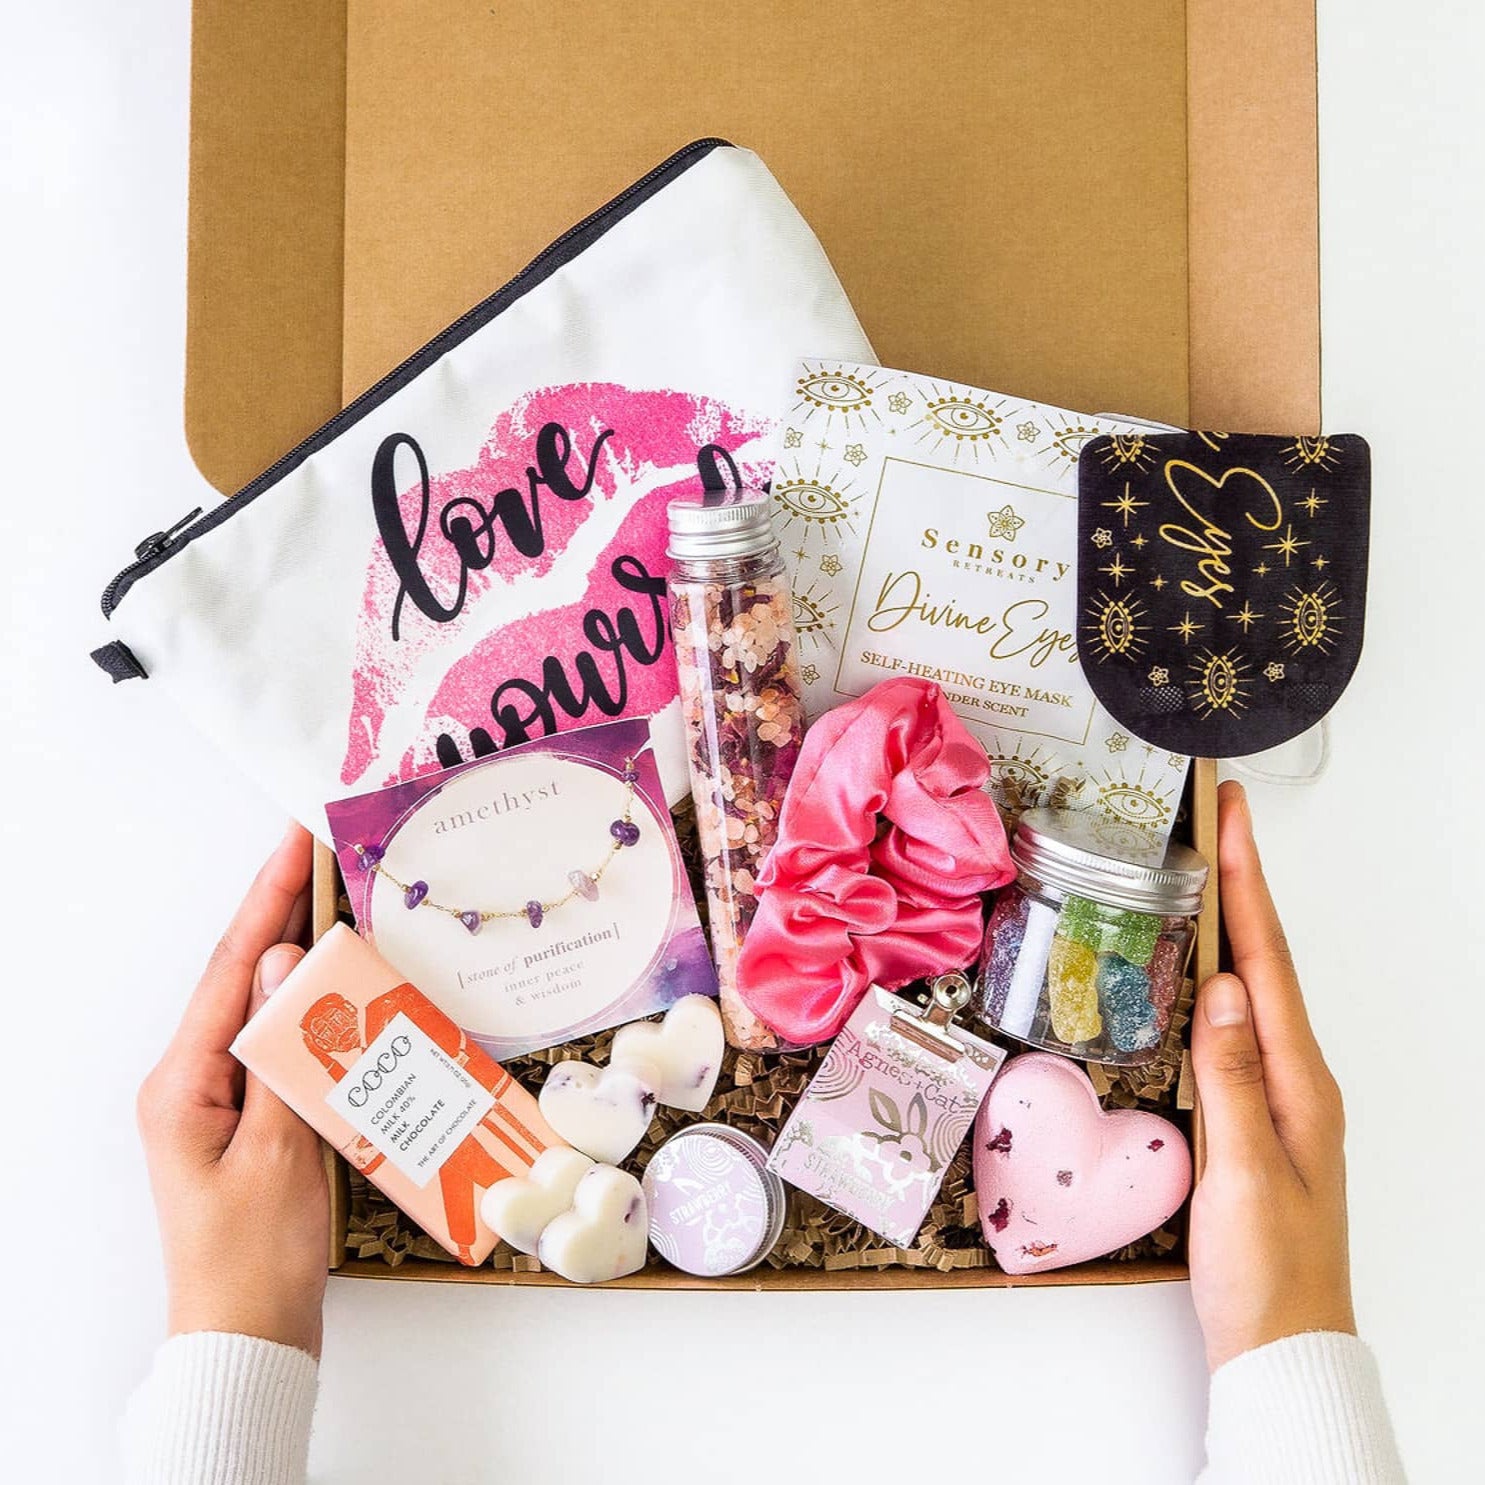 Radiance Revival Luxe Box | Get Well Soon Gifts